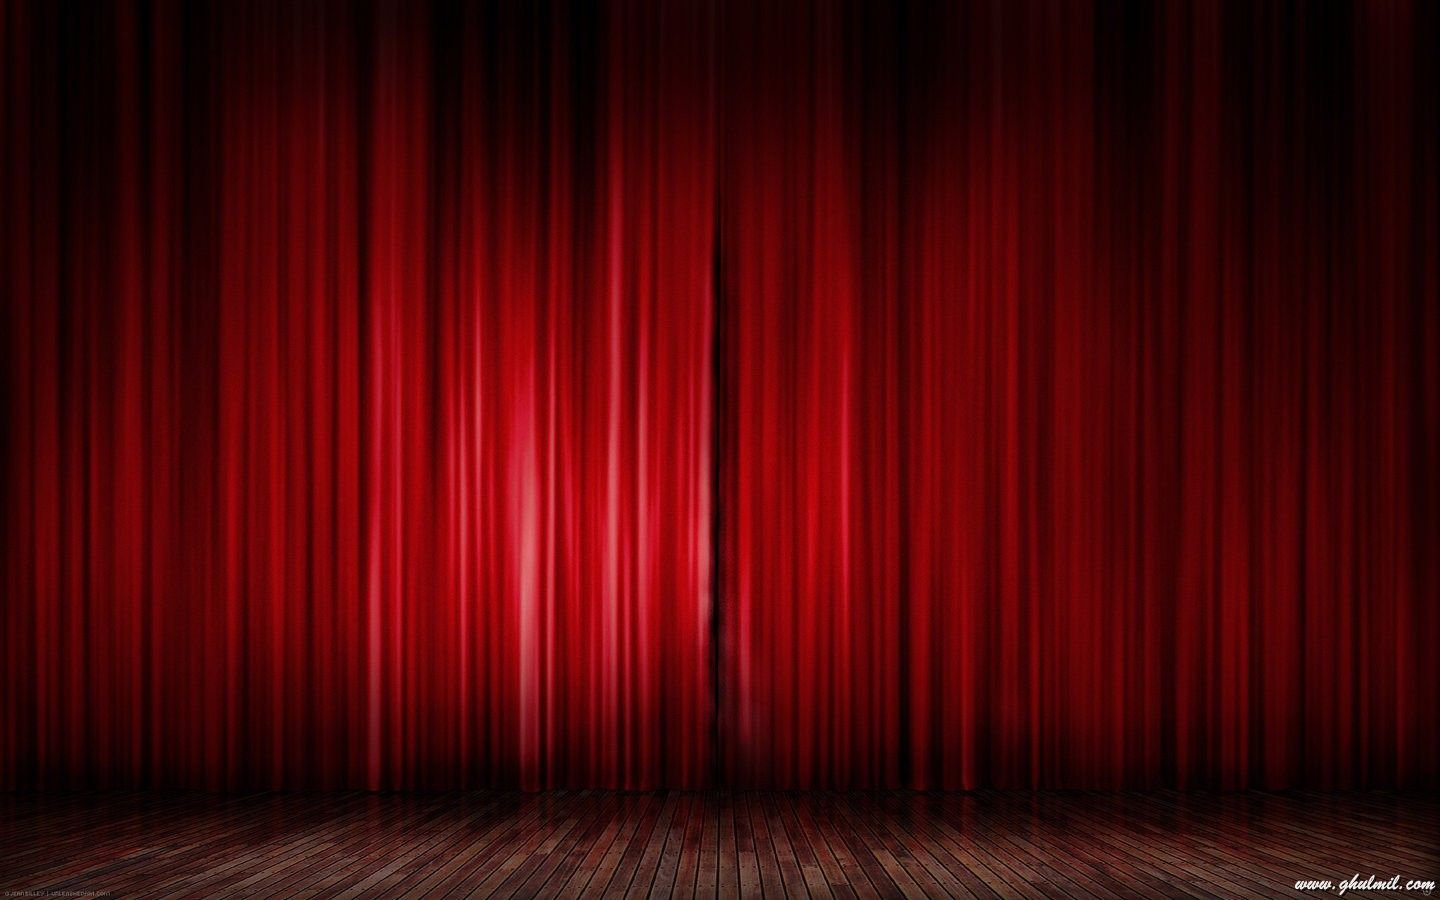 76650 Superb Beautiful Stage Red Curtain Desktop Wallpaper. Red Curtains, Red Wallpaper, Stage Curtains